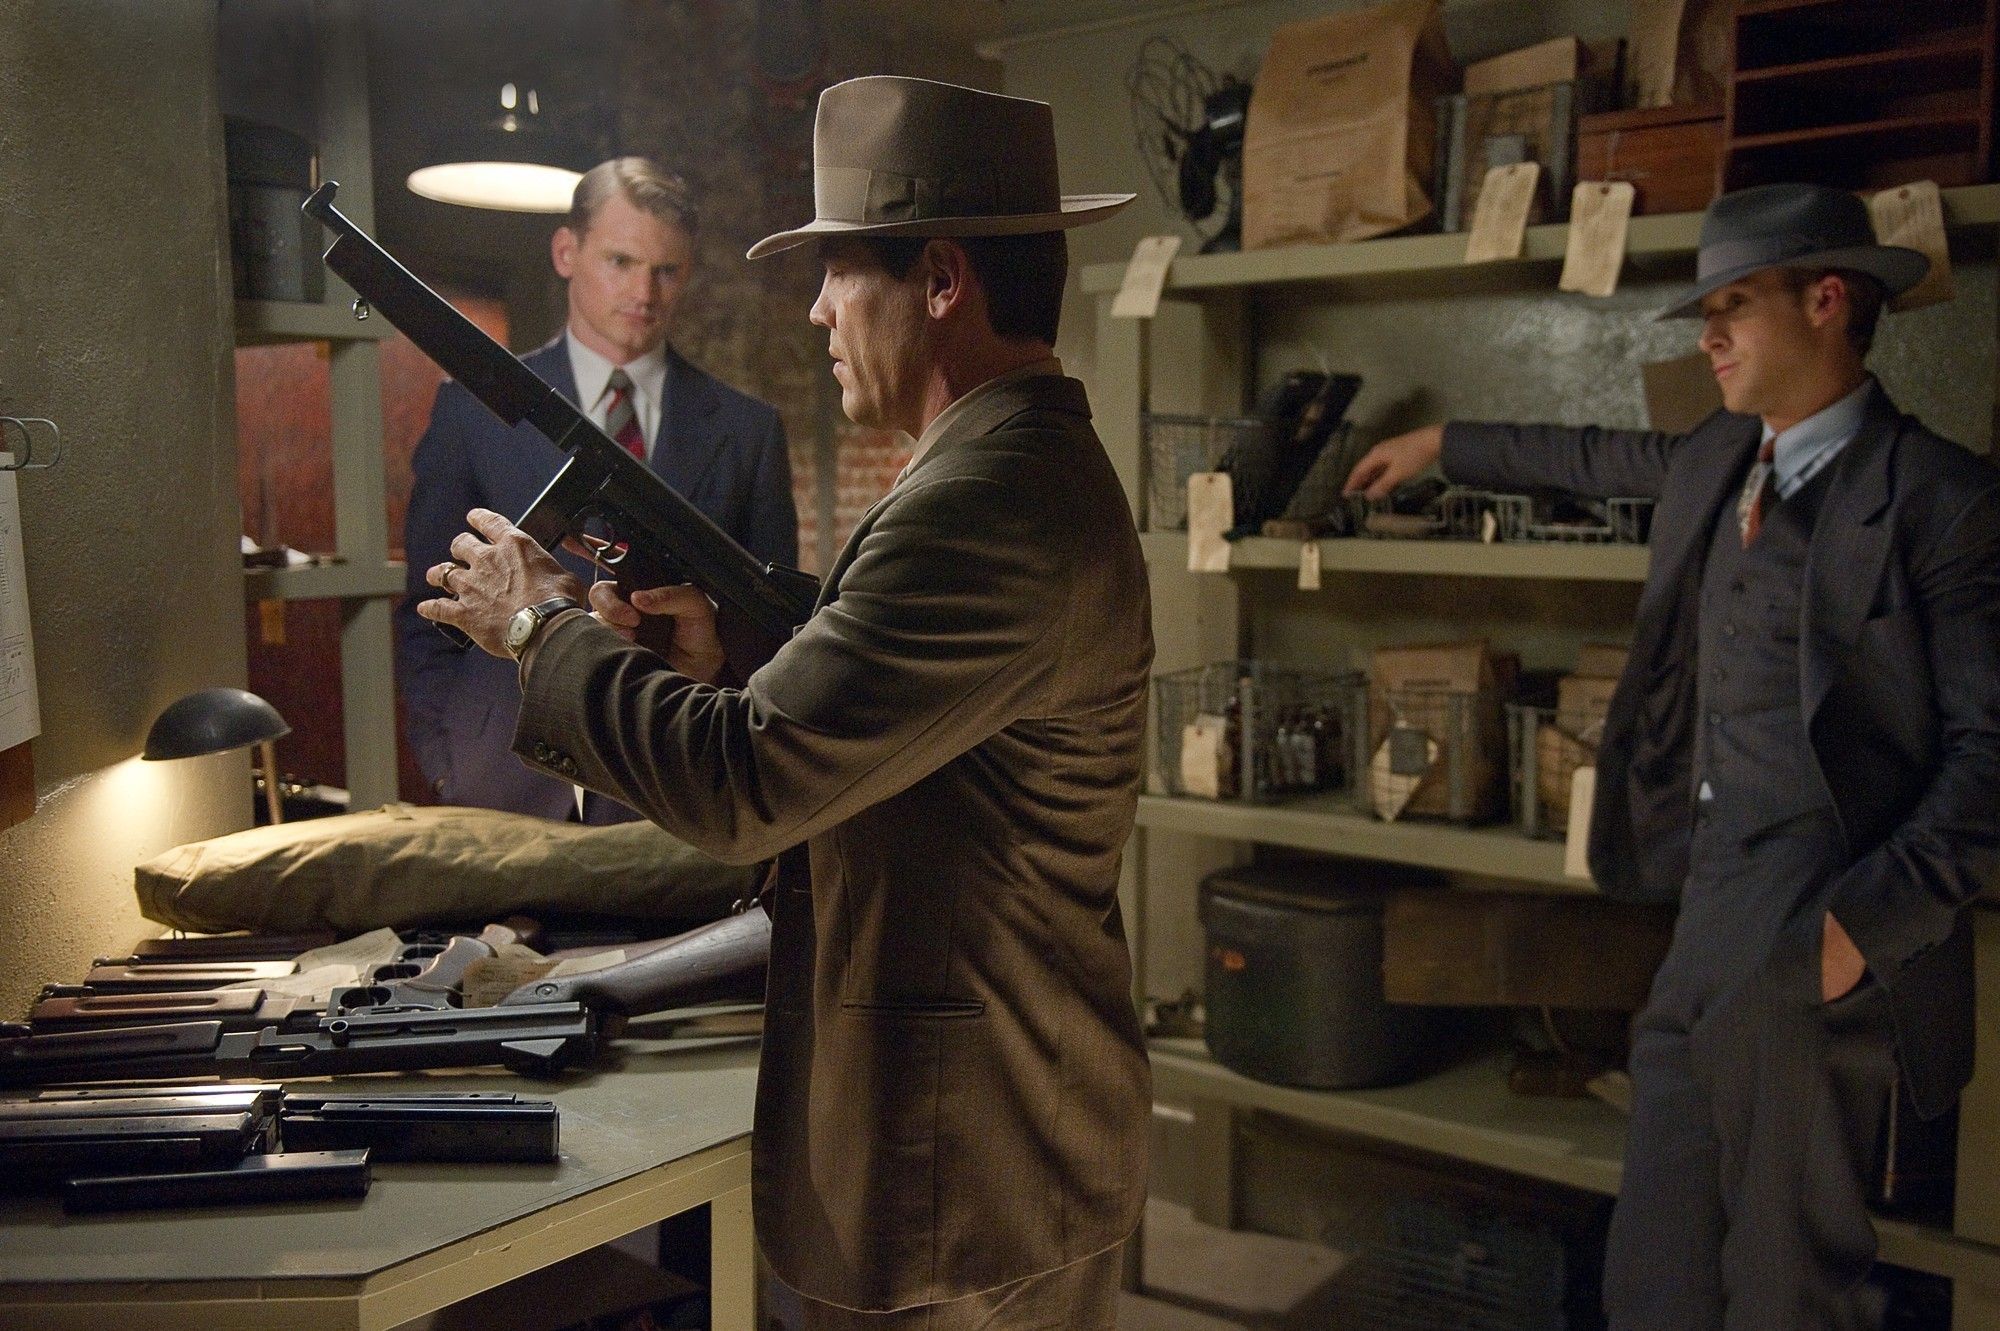 Josh Brolin stars as John O'Mara and Ryan Gosling stars as Sgt. Jerry Wooters in Warner Bros. Pictures' Gangster Squad (2013)